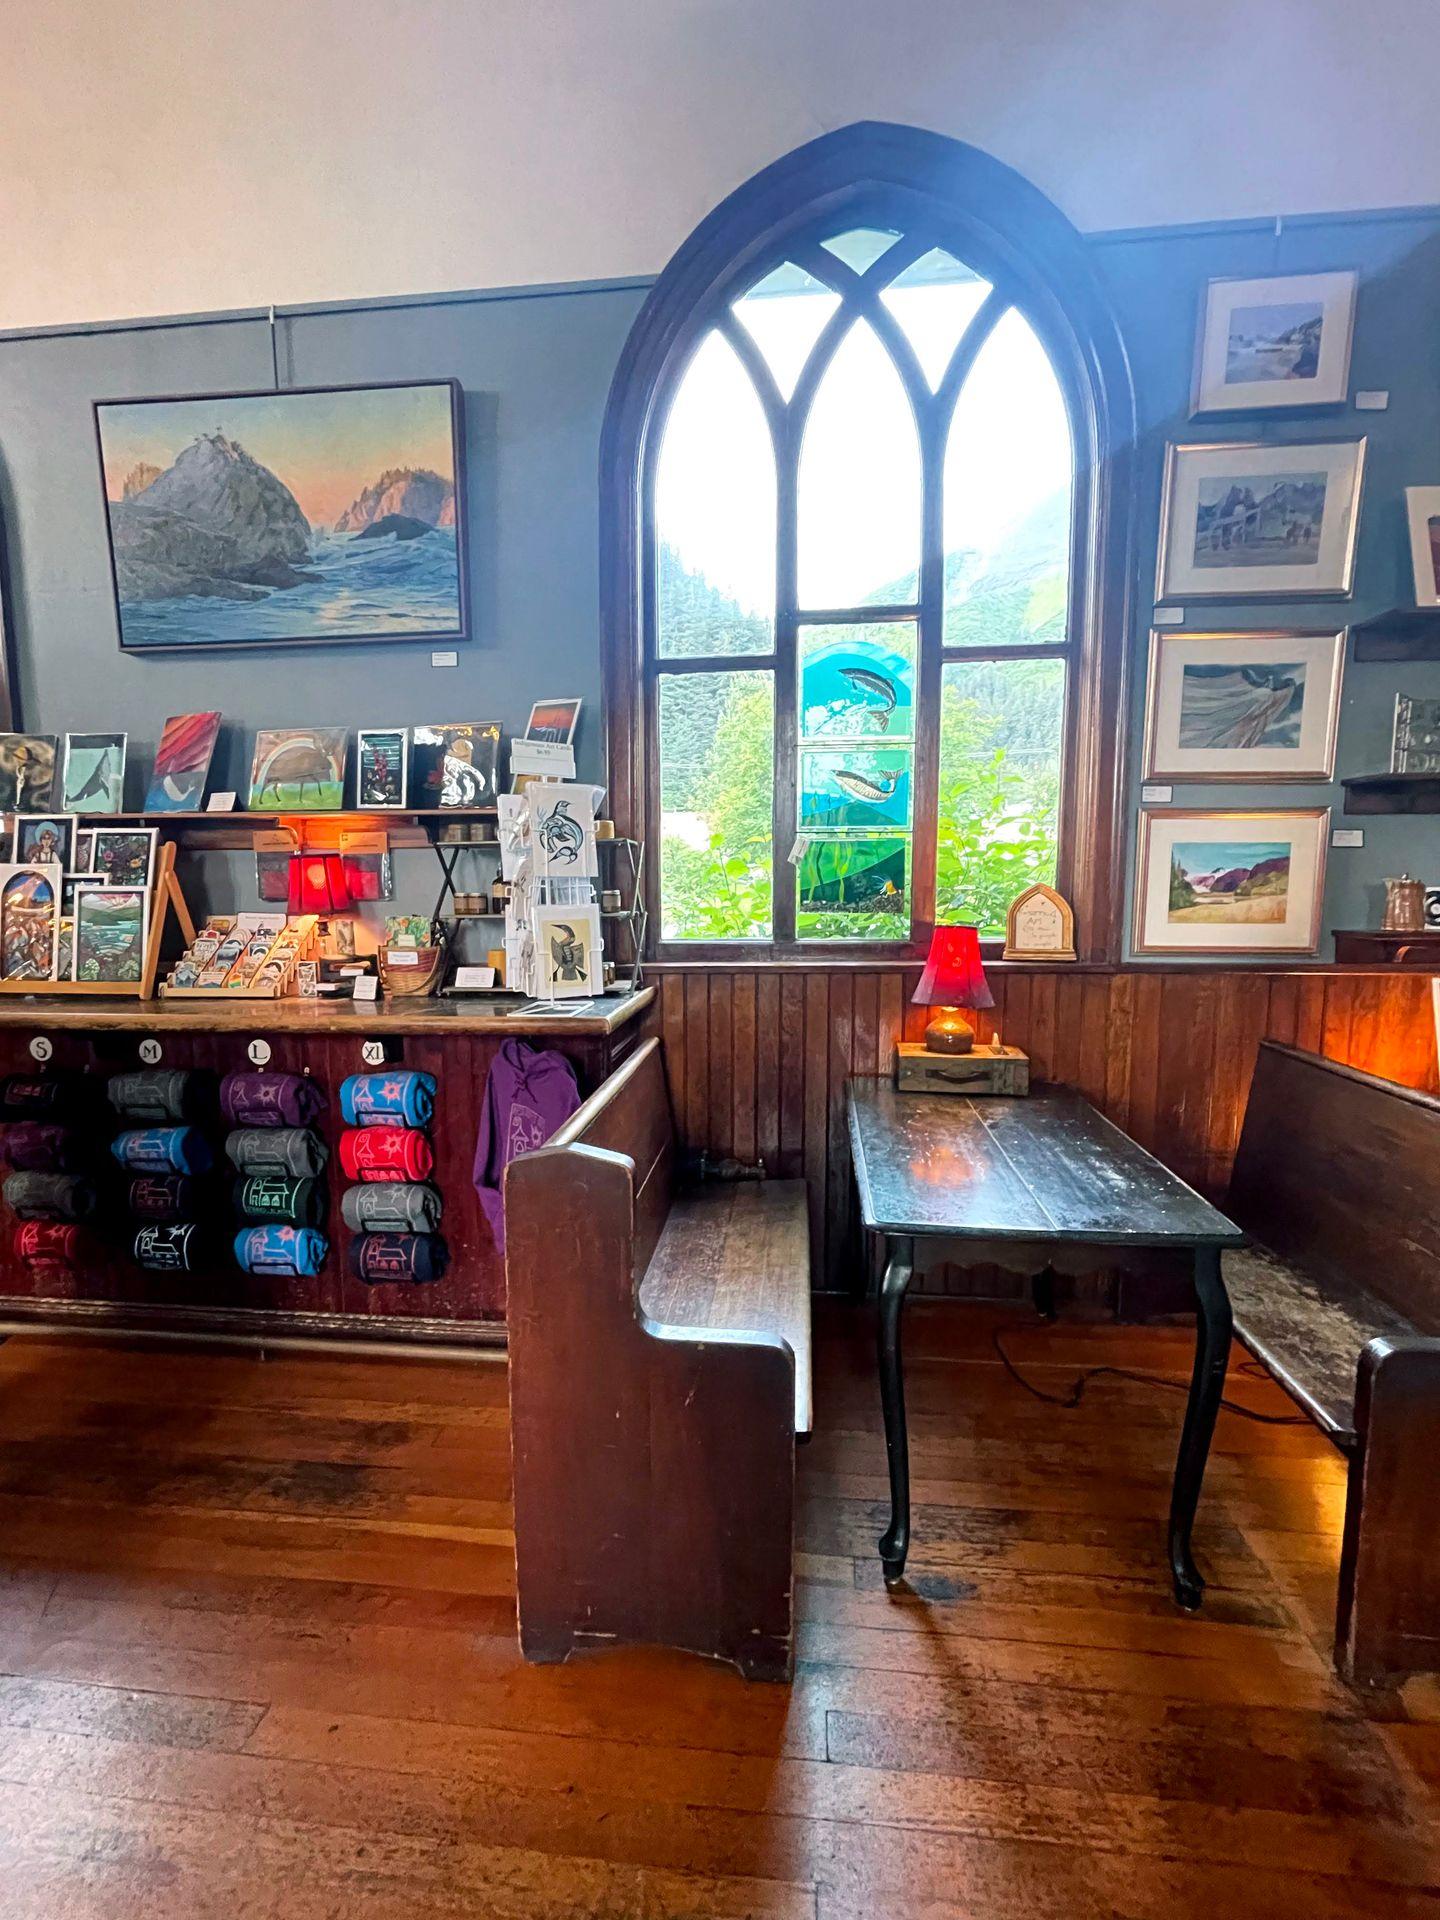 Inside of Resurrect Art Coffee House. There is a window that looks like it's from a church, gifts for sale and a table with pews as benches.